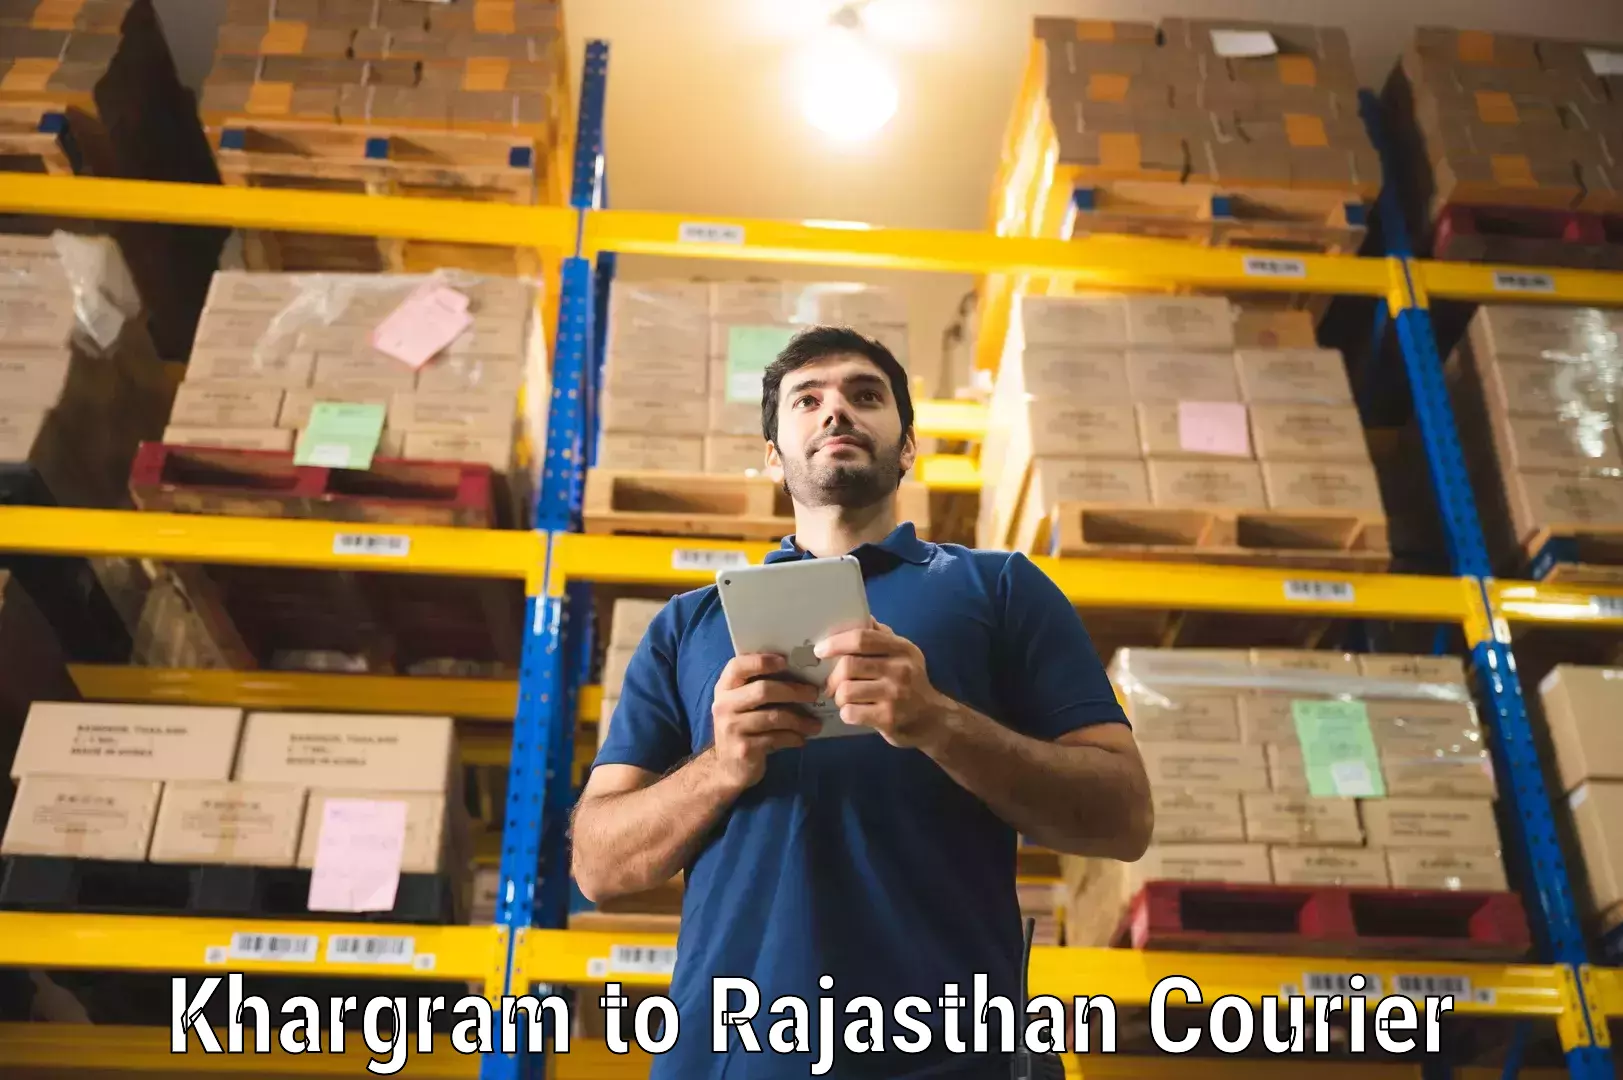 Courier service booking Khargram to Rajasthan